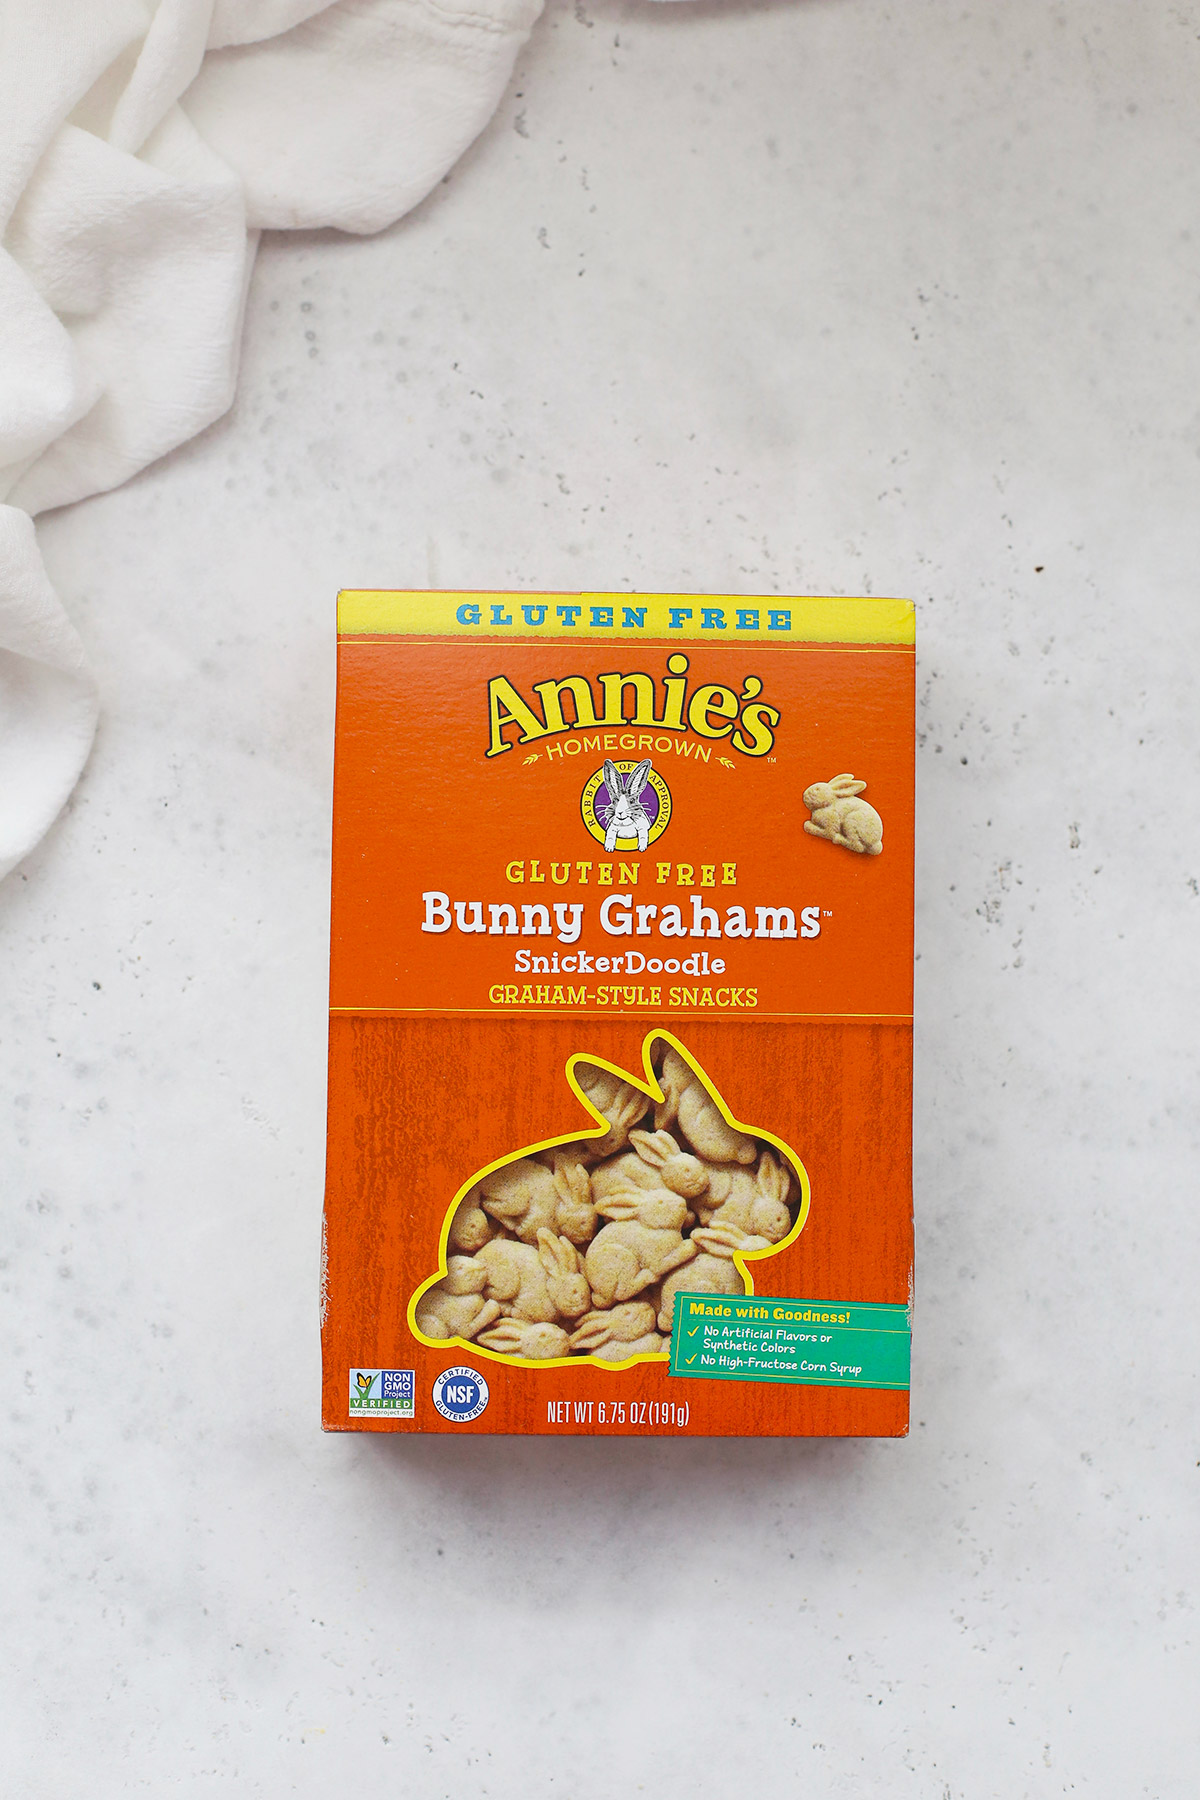 A box of Annie's Gluten-Free Snickerdoodle Bunnies crackers on a white background